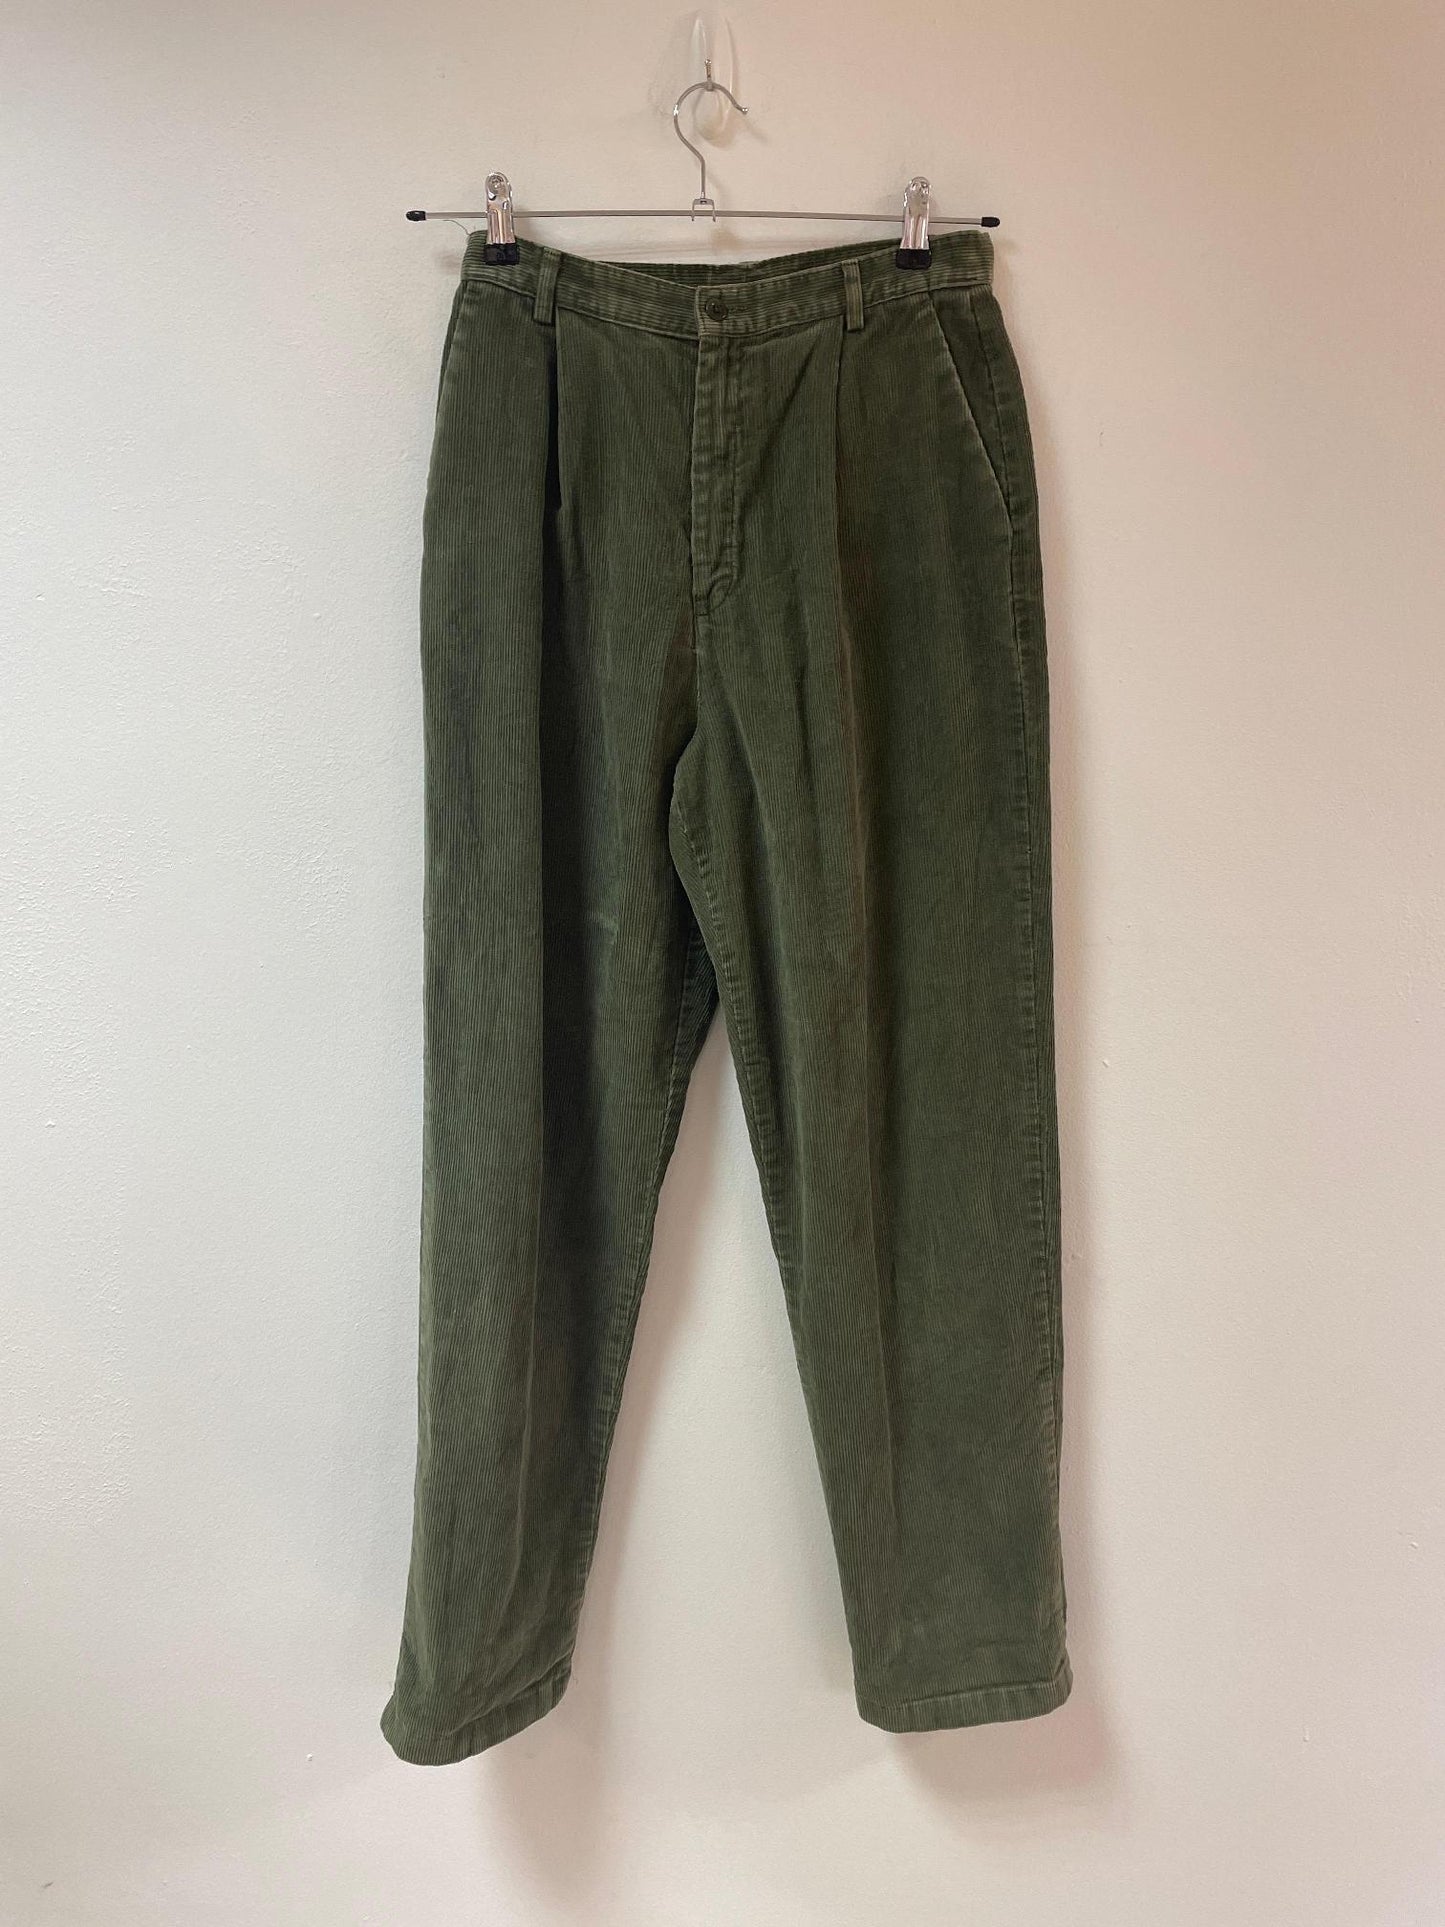 Green corduroy straight leg trousers, Lands' End, size 10 Tall - Damaged Item Sale